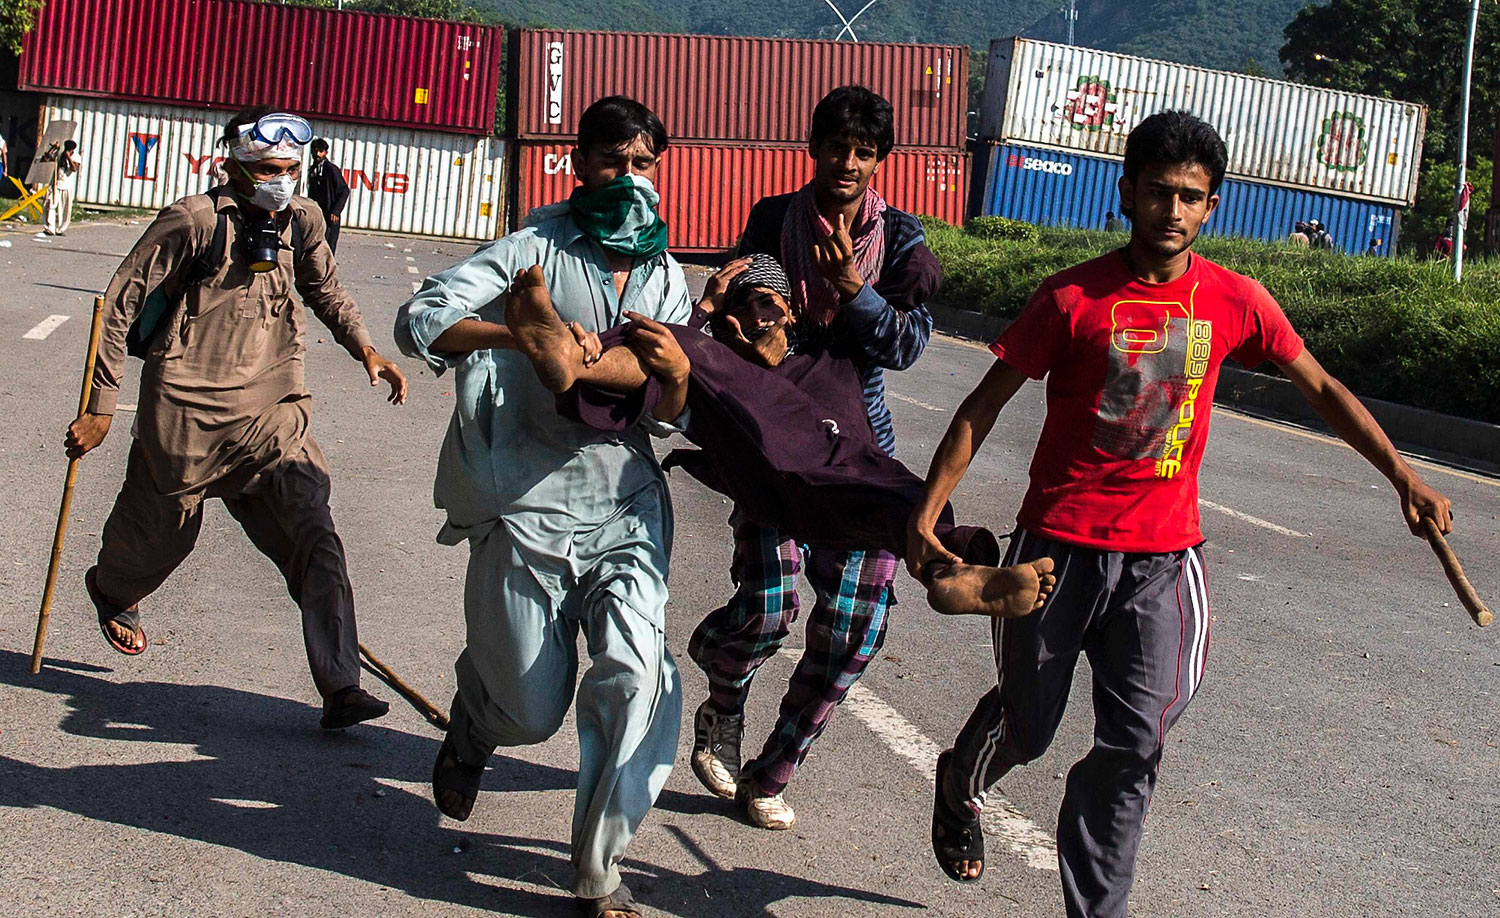 Supporters of Tahir ul-Qadri, Sufi cleric and leader of political party Pakistan Awami Tehreek (PAT), carry an injured fellow protester during the Revolution March in Islamabad